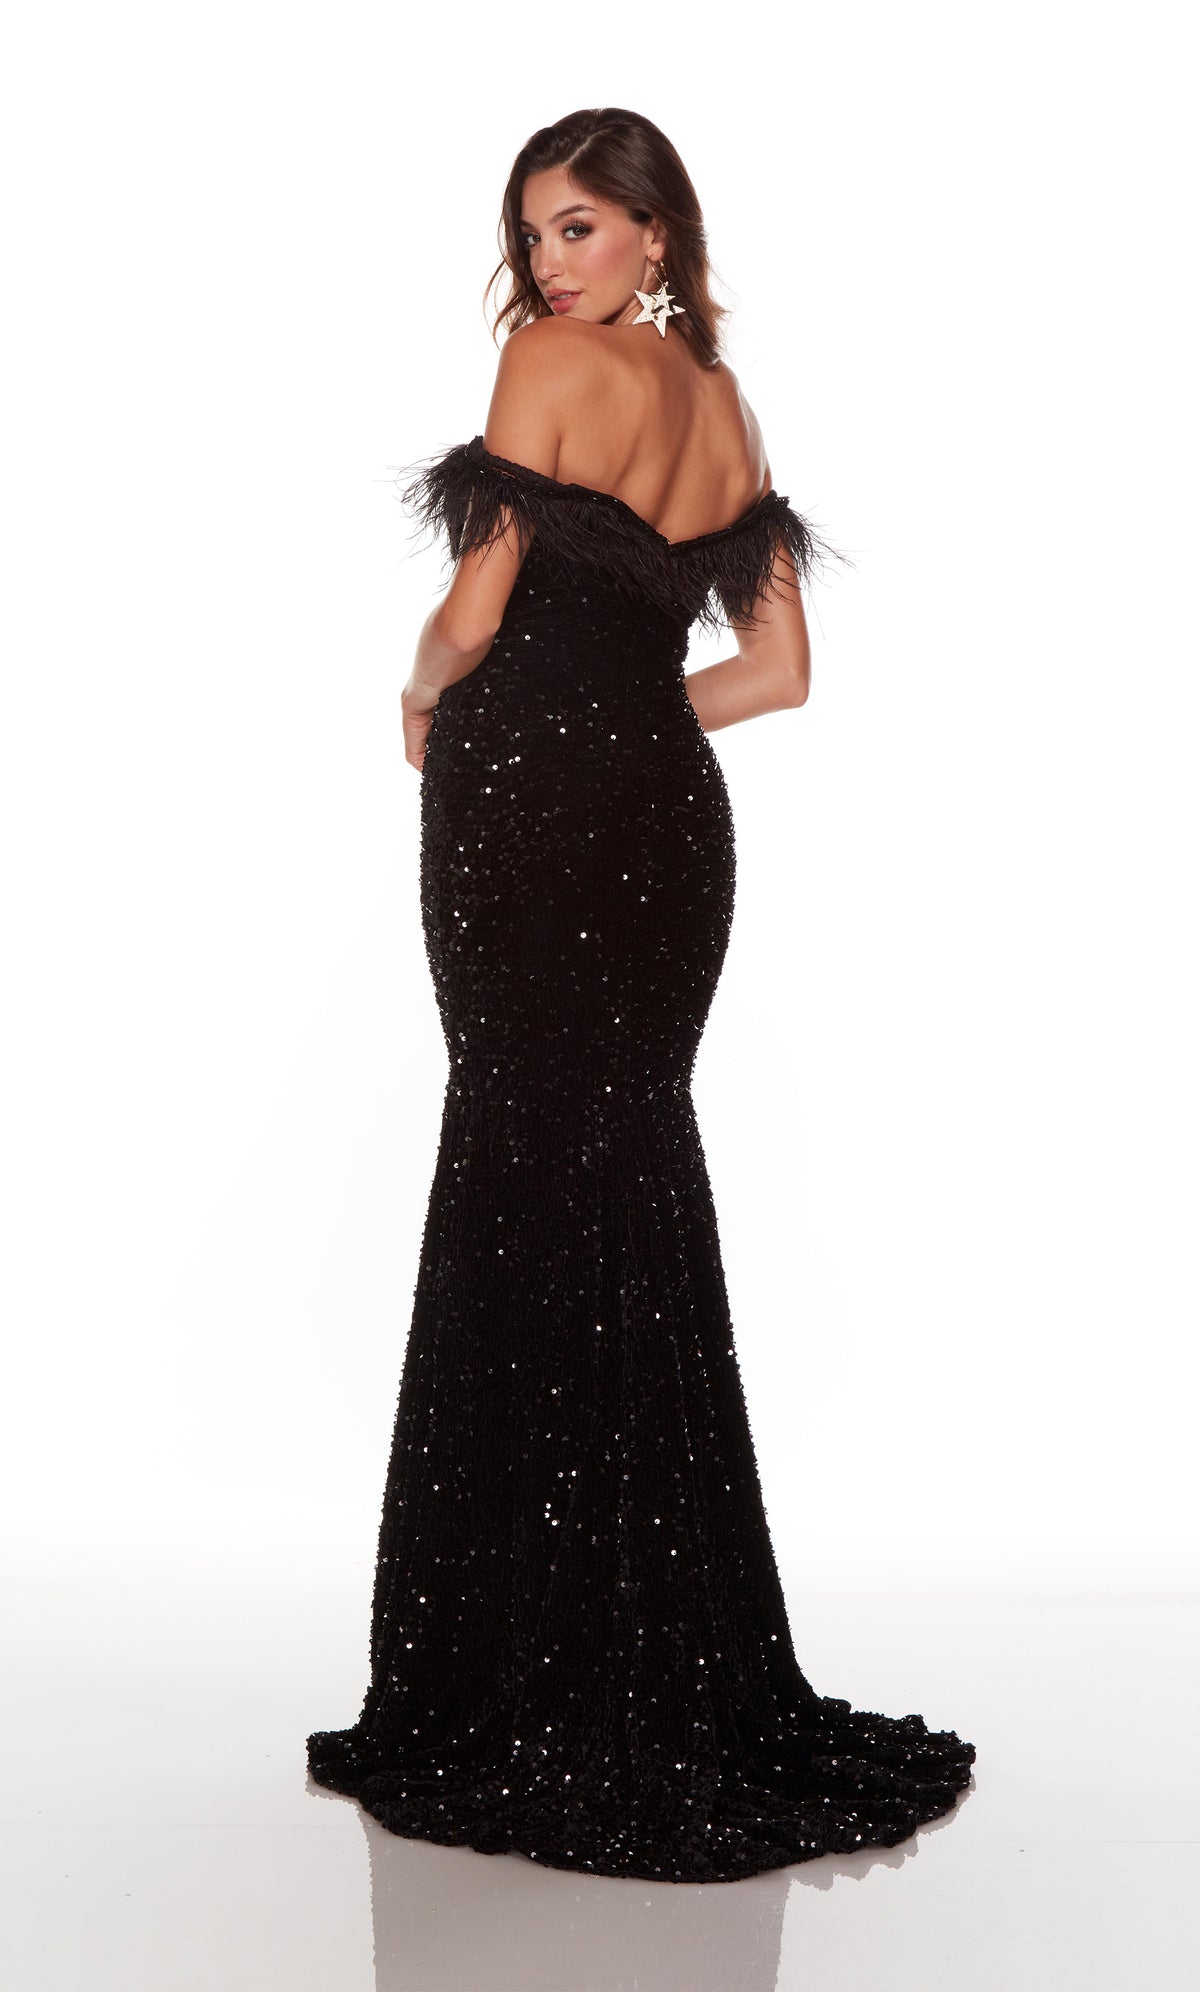 Black off the shoulder evening gown with feather trim, a zip up back, and train.